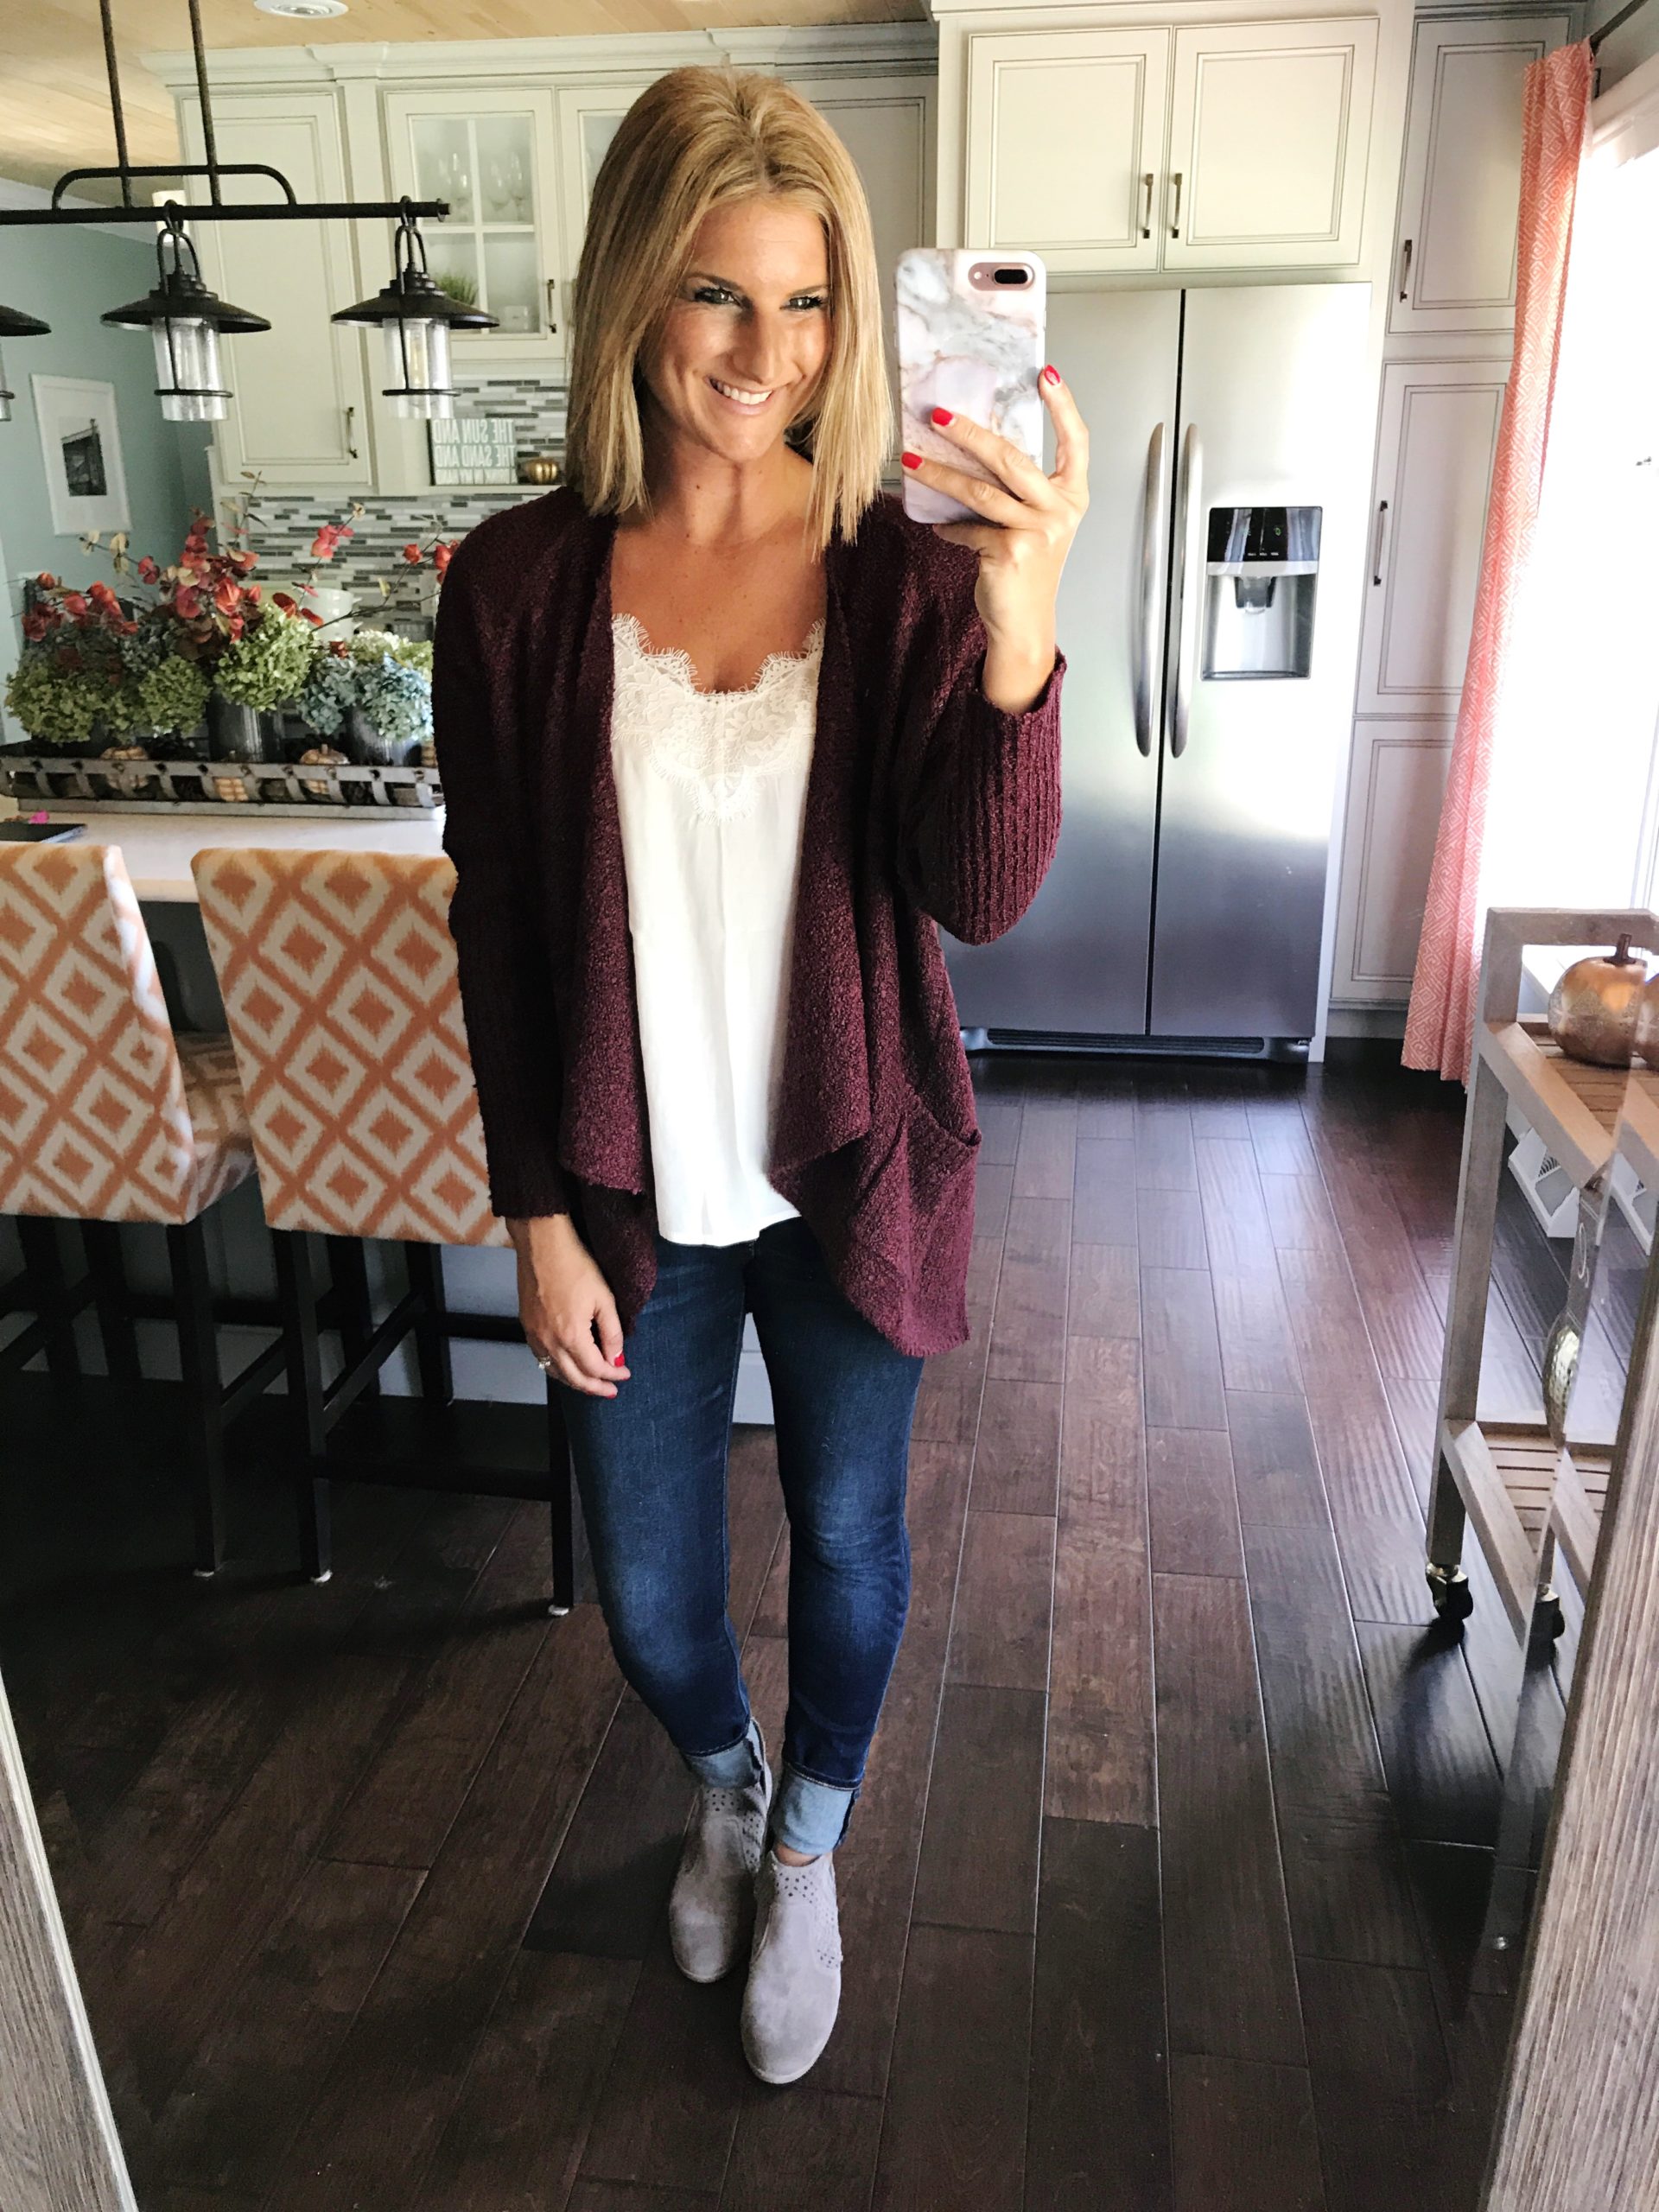 Casual Fall Outfit